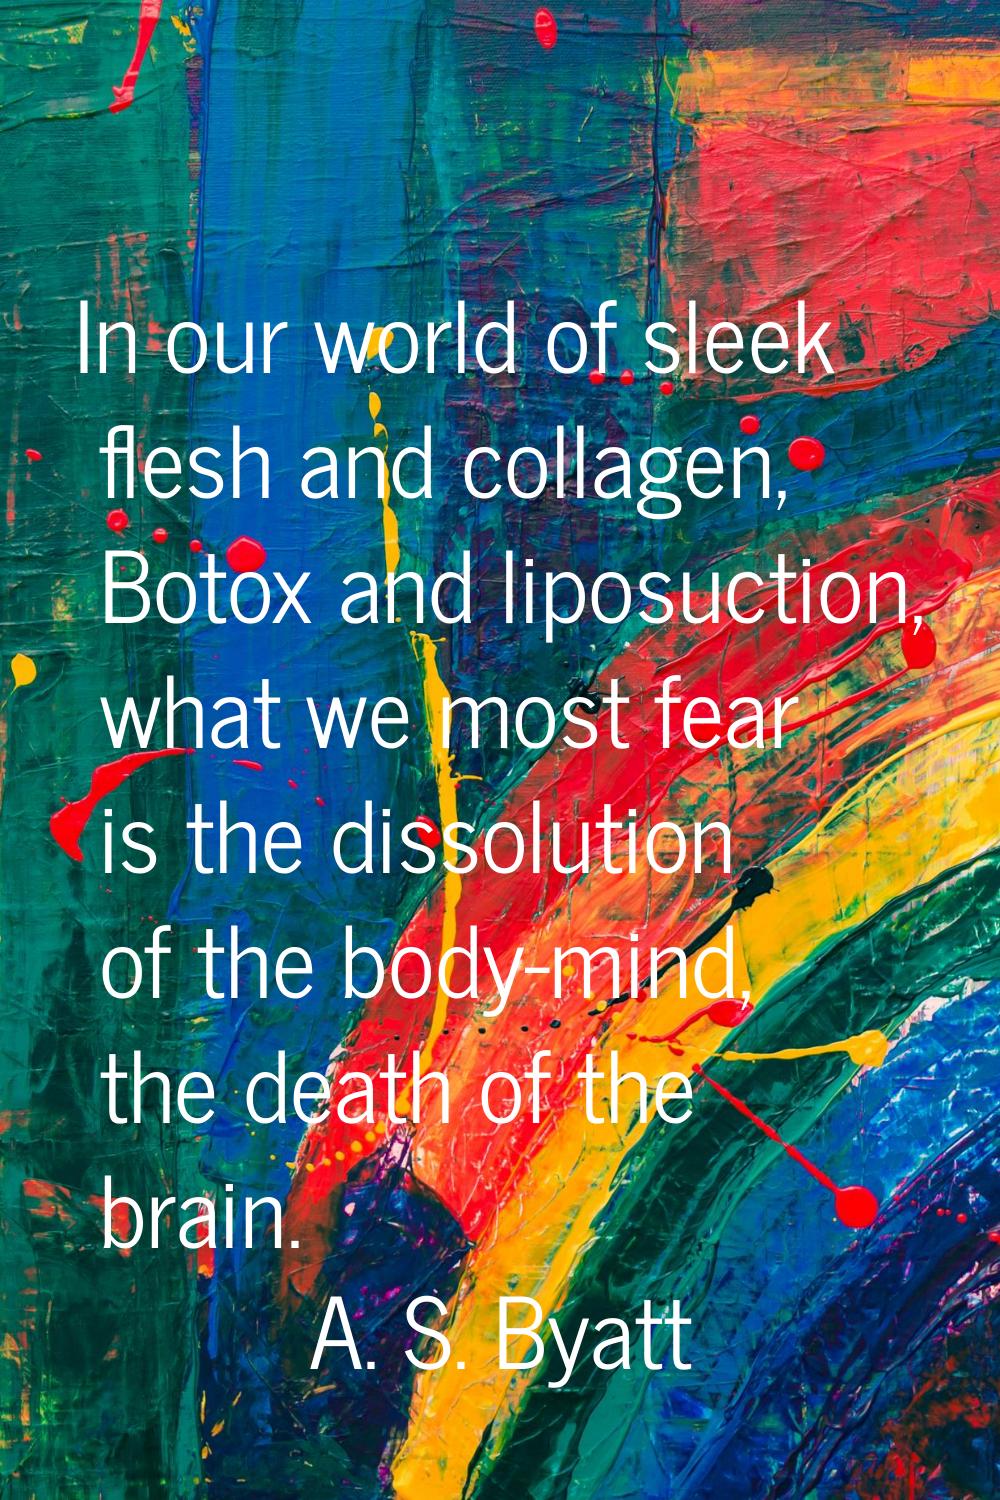 In our world of sleek flesh and collagen, Botox and liposuction, what we most fear is the dissoluti